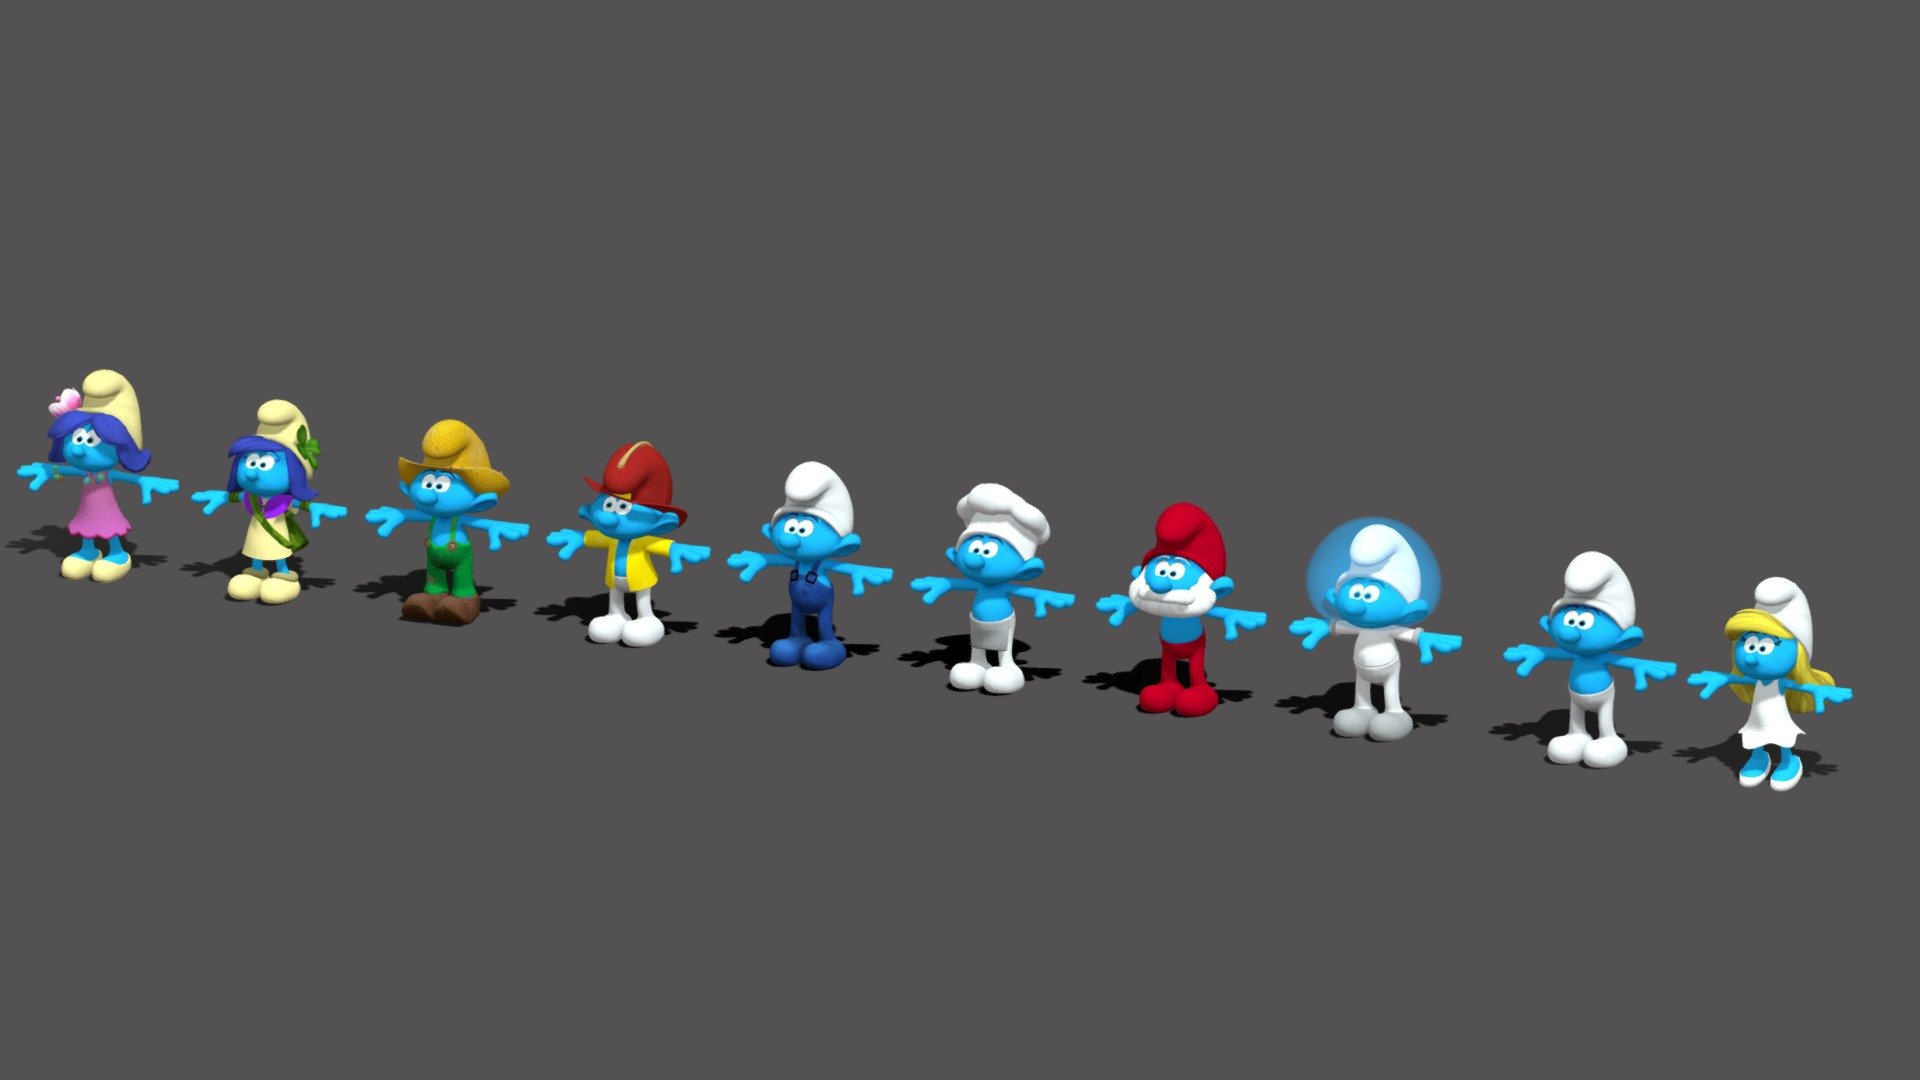 Papa Smurf

Smurfette

Clumsy Smurf

Hefty Smurf

Handy Smurf

Jokey Smurf

Chef Smurf

Farmer Smurf

Smurf Blossom 

Smurf Storm

Complete Smurf Family
 Smurf Cartoon Animated
Fully Rigged
Blender file + FBX + Iclone - Smurf Family Complete - Buy Royalty Free 3D model by Usman Ahmed GIll (@usman.ahmed.gill.93) 3d model